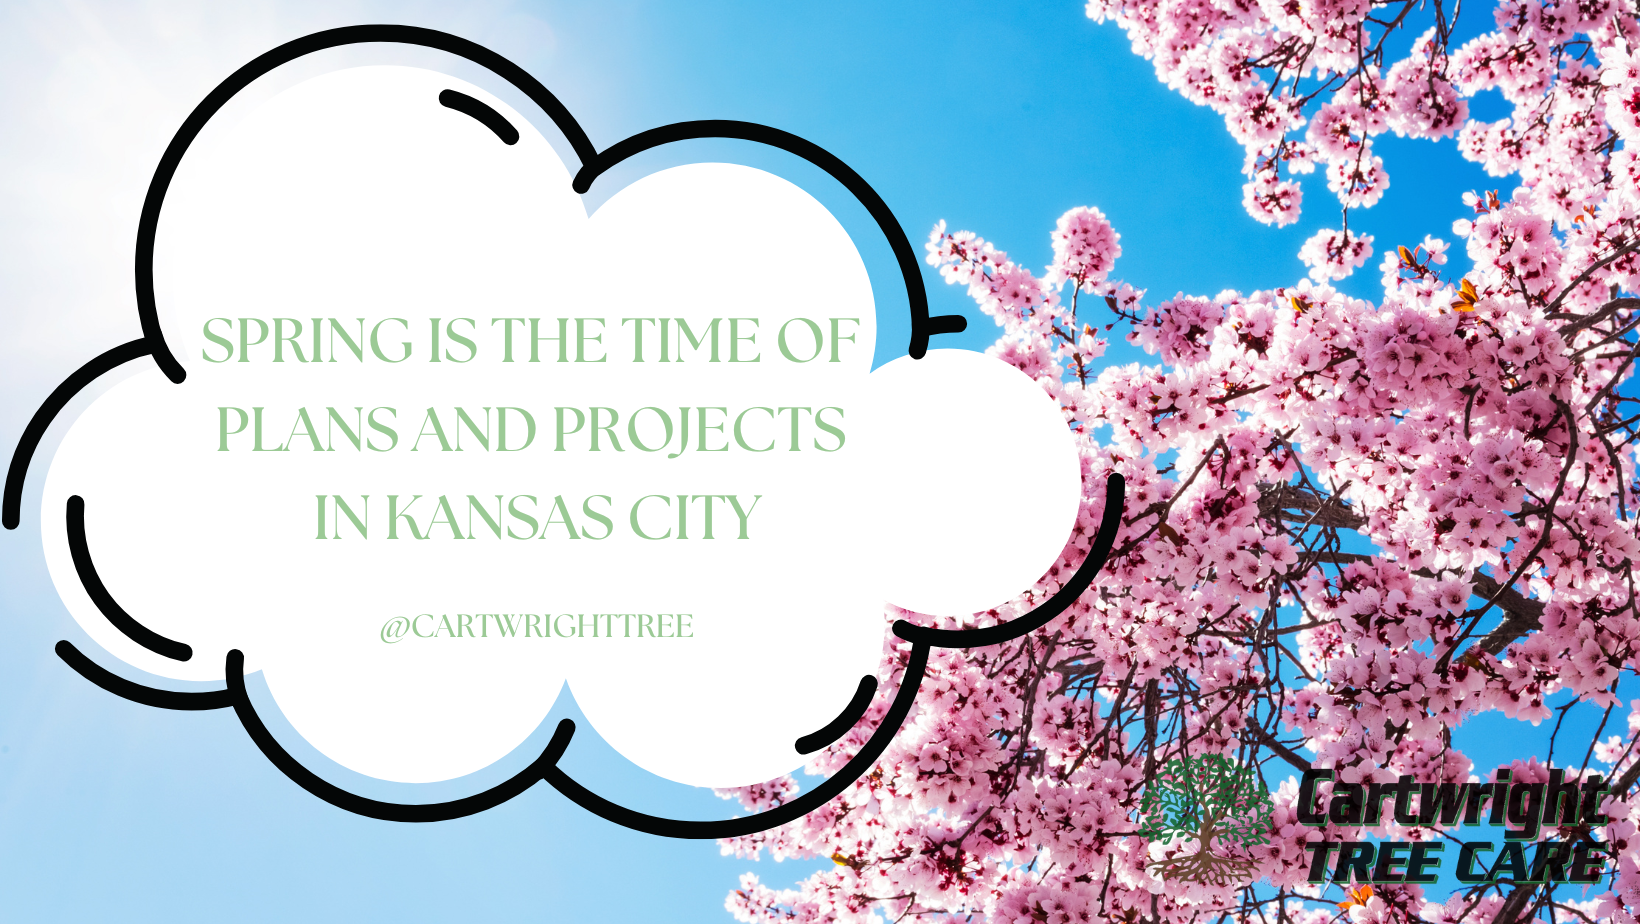 Spring Is The Time Of Plans And Projects In Kansas City Blog Cover 3